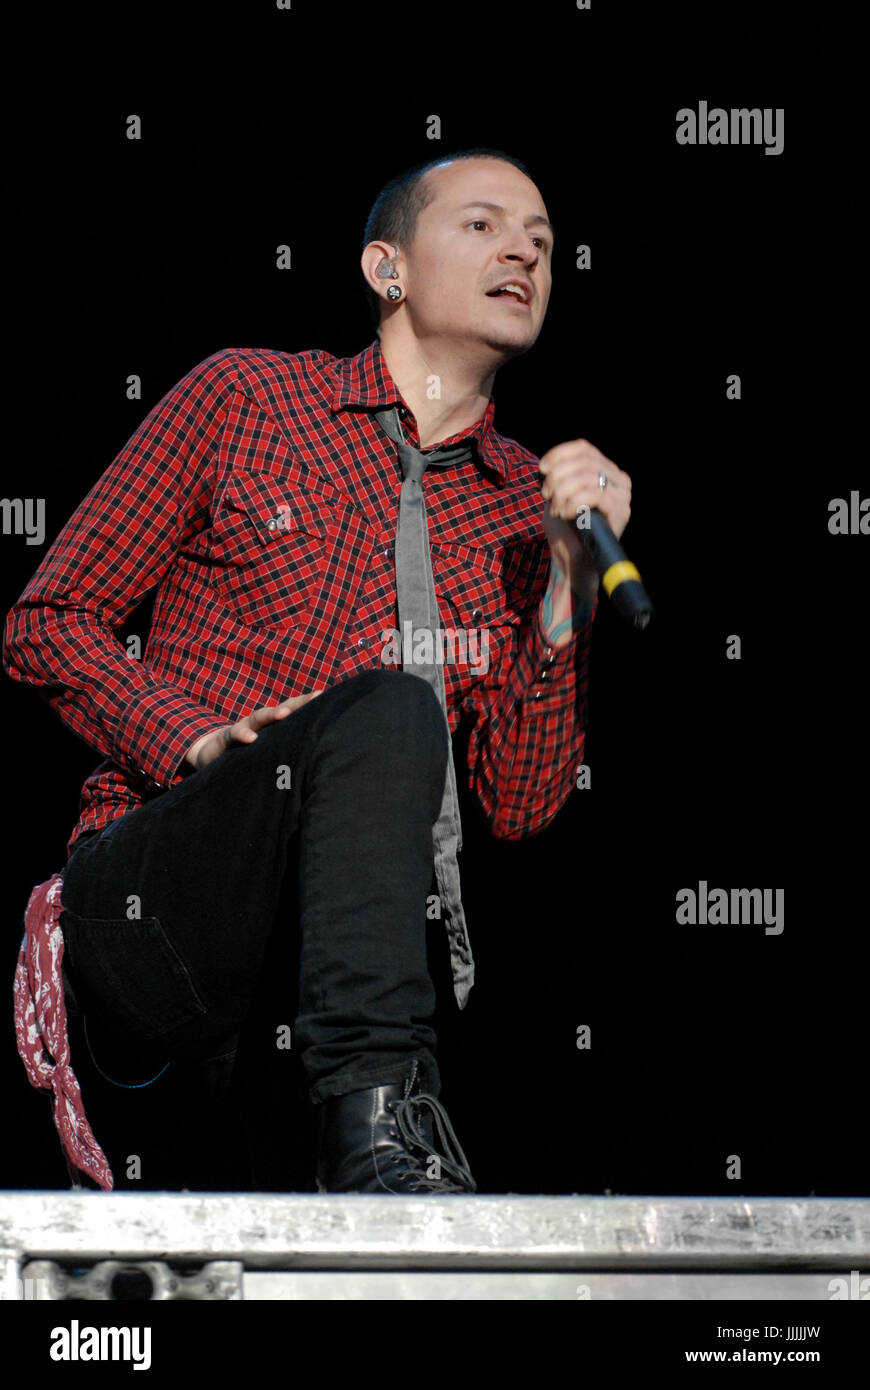 FILE PICS: 20th July, 2017. Donington Park, Derbyshire UK. 9th Jun, 2007. Chester Bennington, the lead singer of Linkin Park has passed away at the age of 41 today 20th July 2017 - Chester Bennington of Linkin Park photographed during their performance at Download Festival 2007 - day two 9th June 2007 at Donington Park, Derbyshire Credit: Ben Rector/Alamy Live News Stock Photo